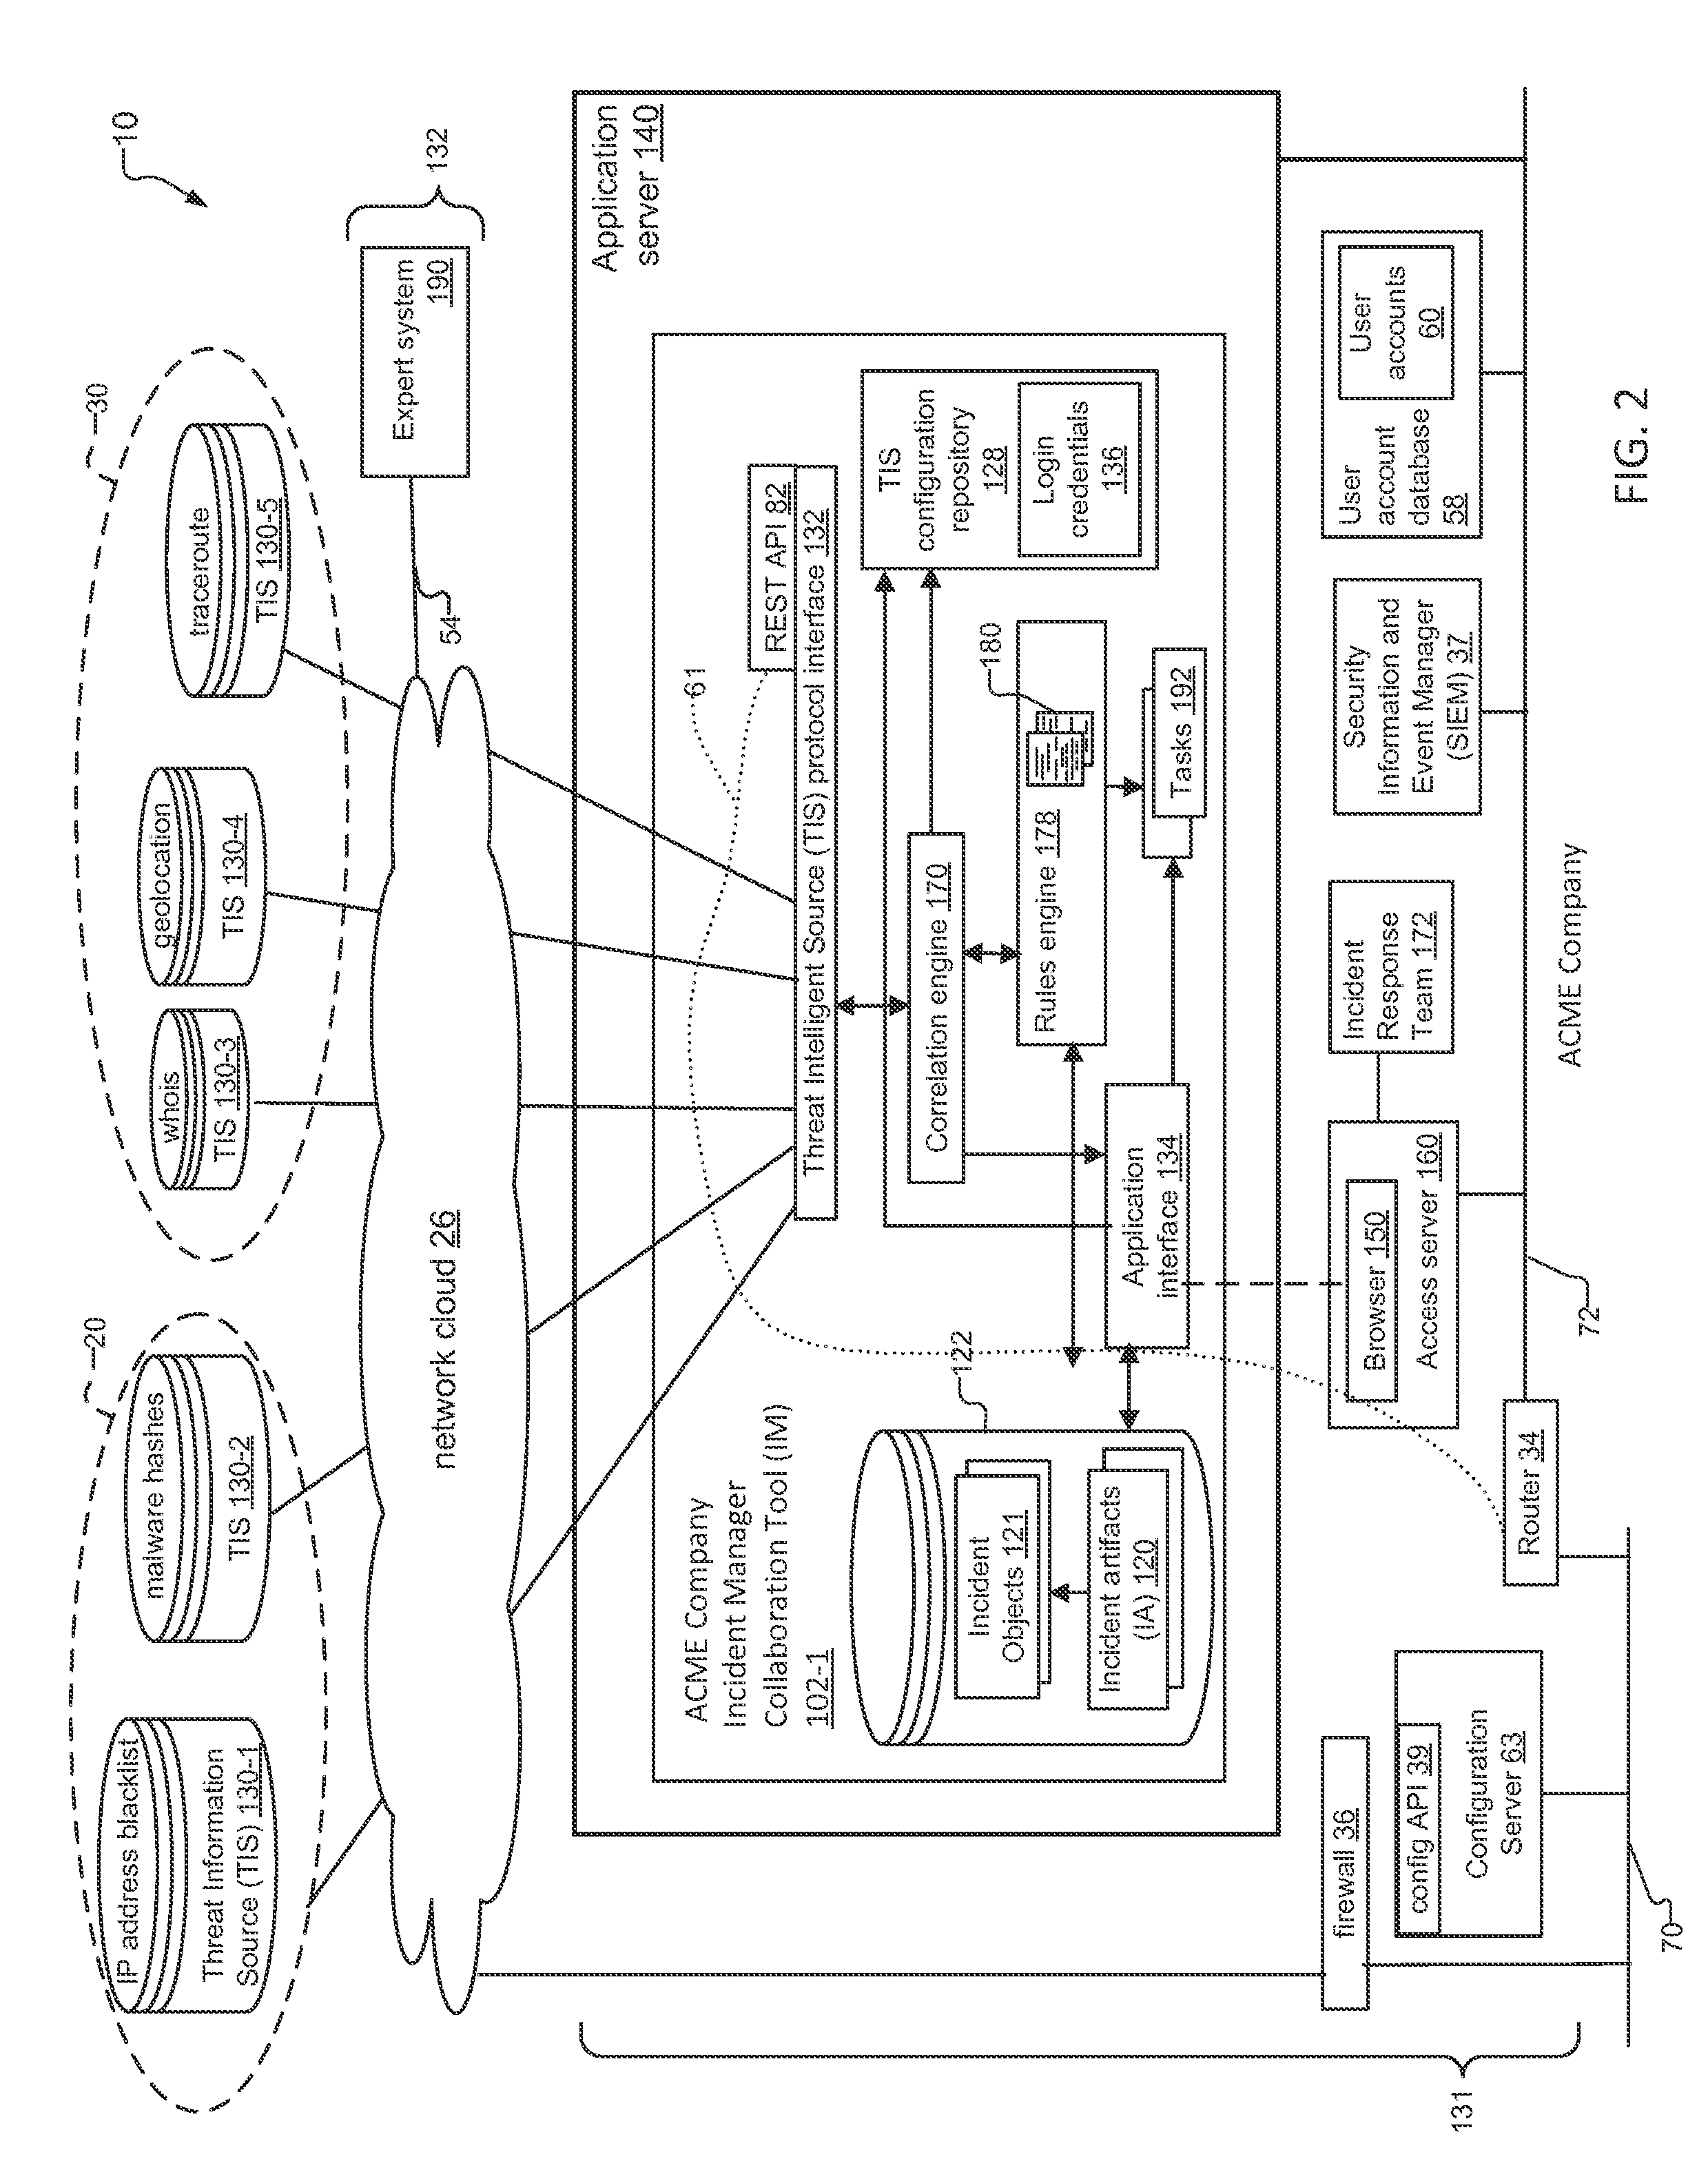 System for Tracking Data Security Threats and Method for Same